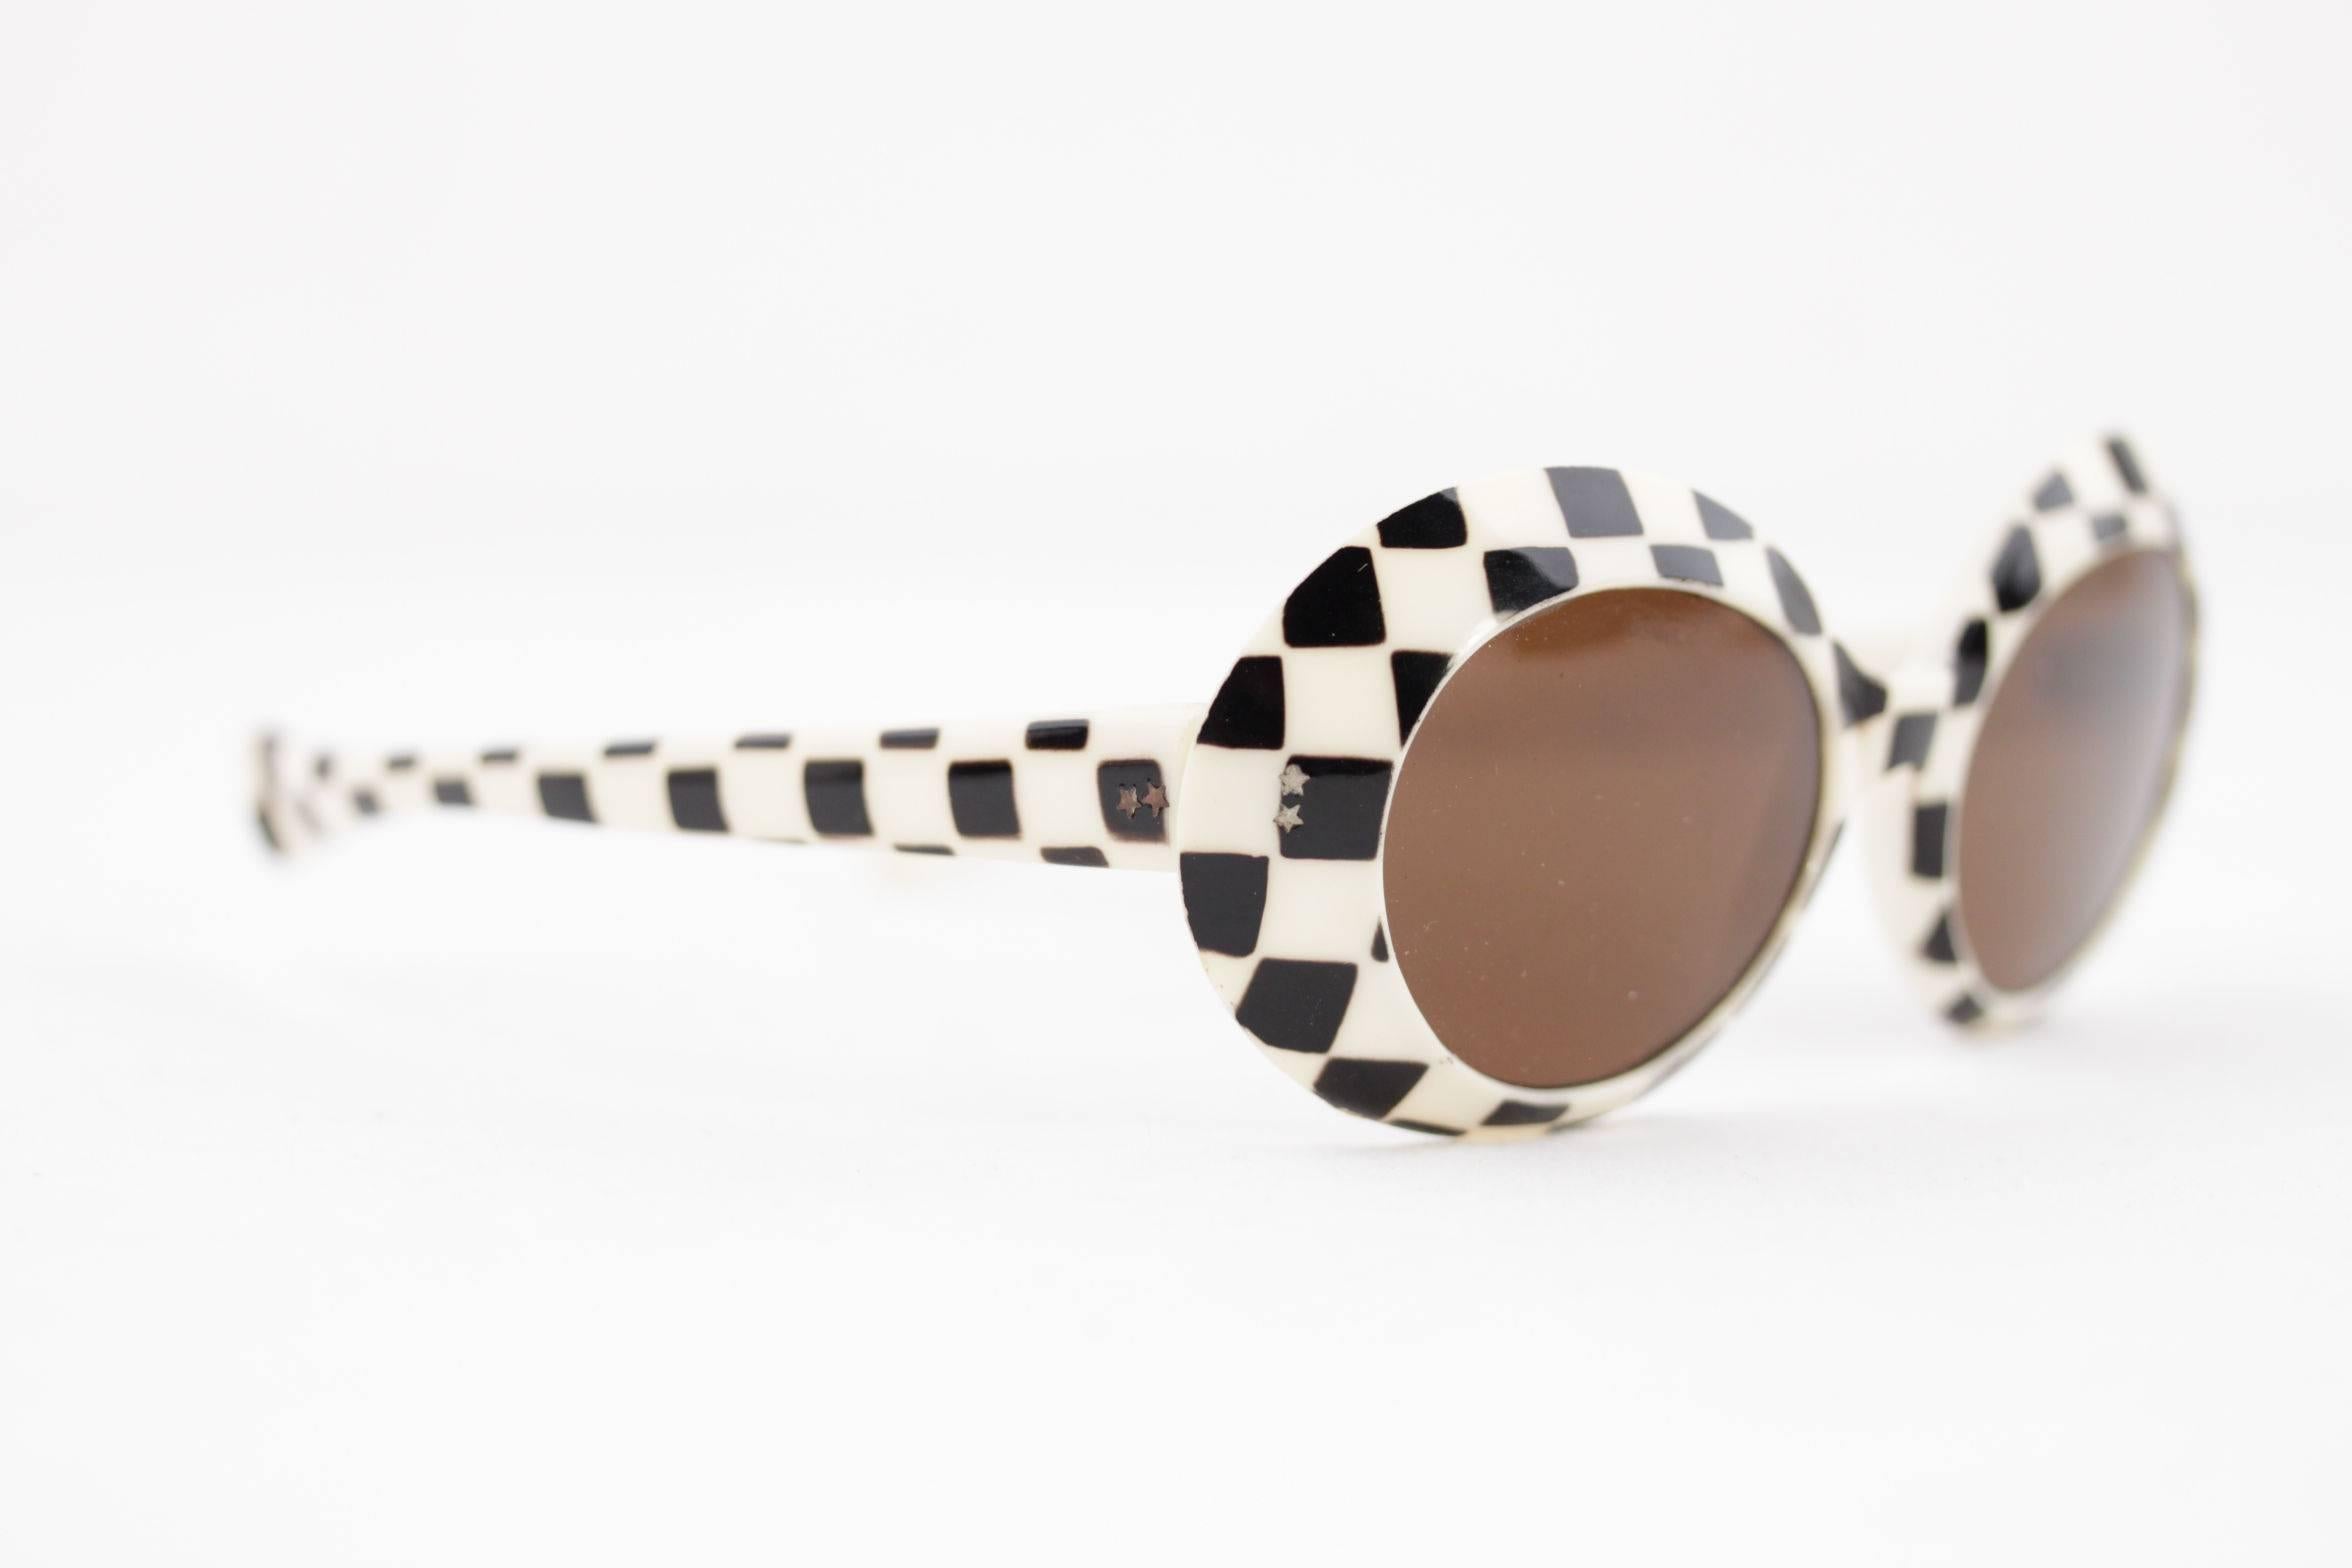  - Splendid sunglasses from the 60s bt SAMCO - Made in Italy

- Black & White checkerboard frame

- Original Brown lenses (SAMCO signature on both lenses)

- Hinges attache with little star shaped pins

- Inside right temple reads: in the